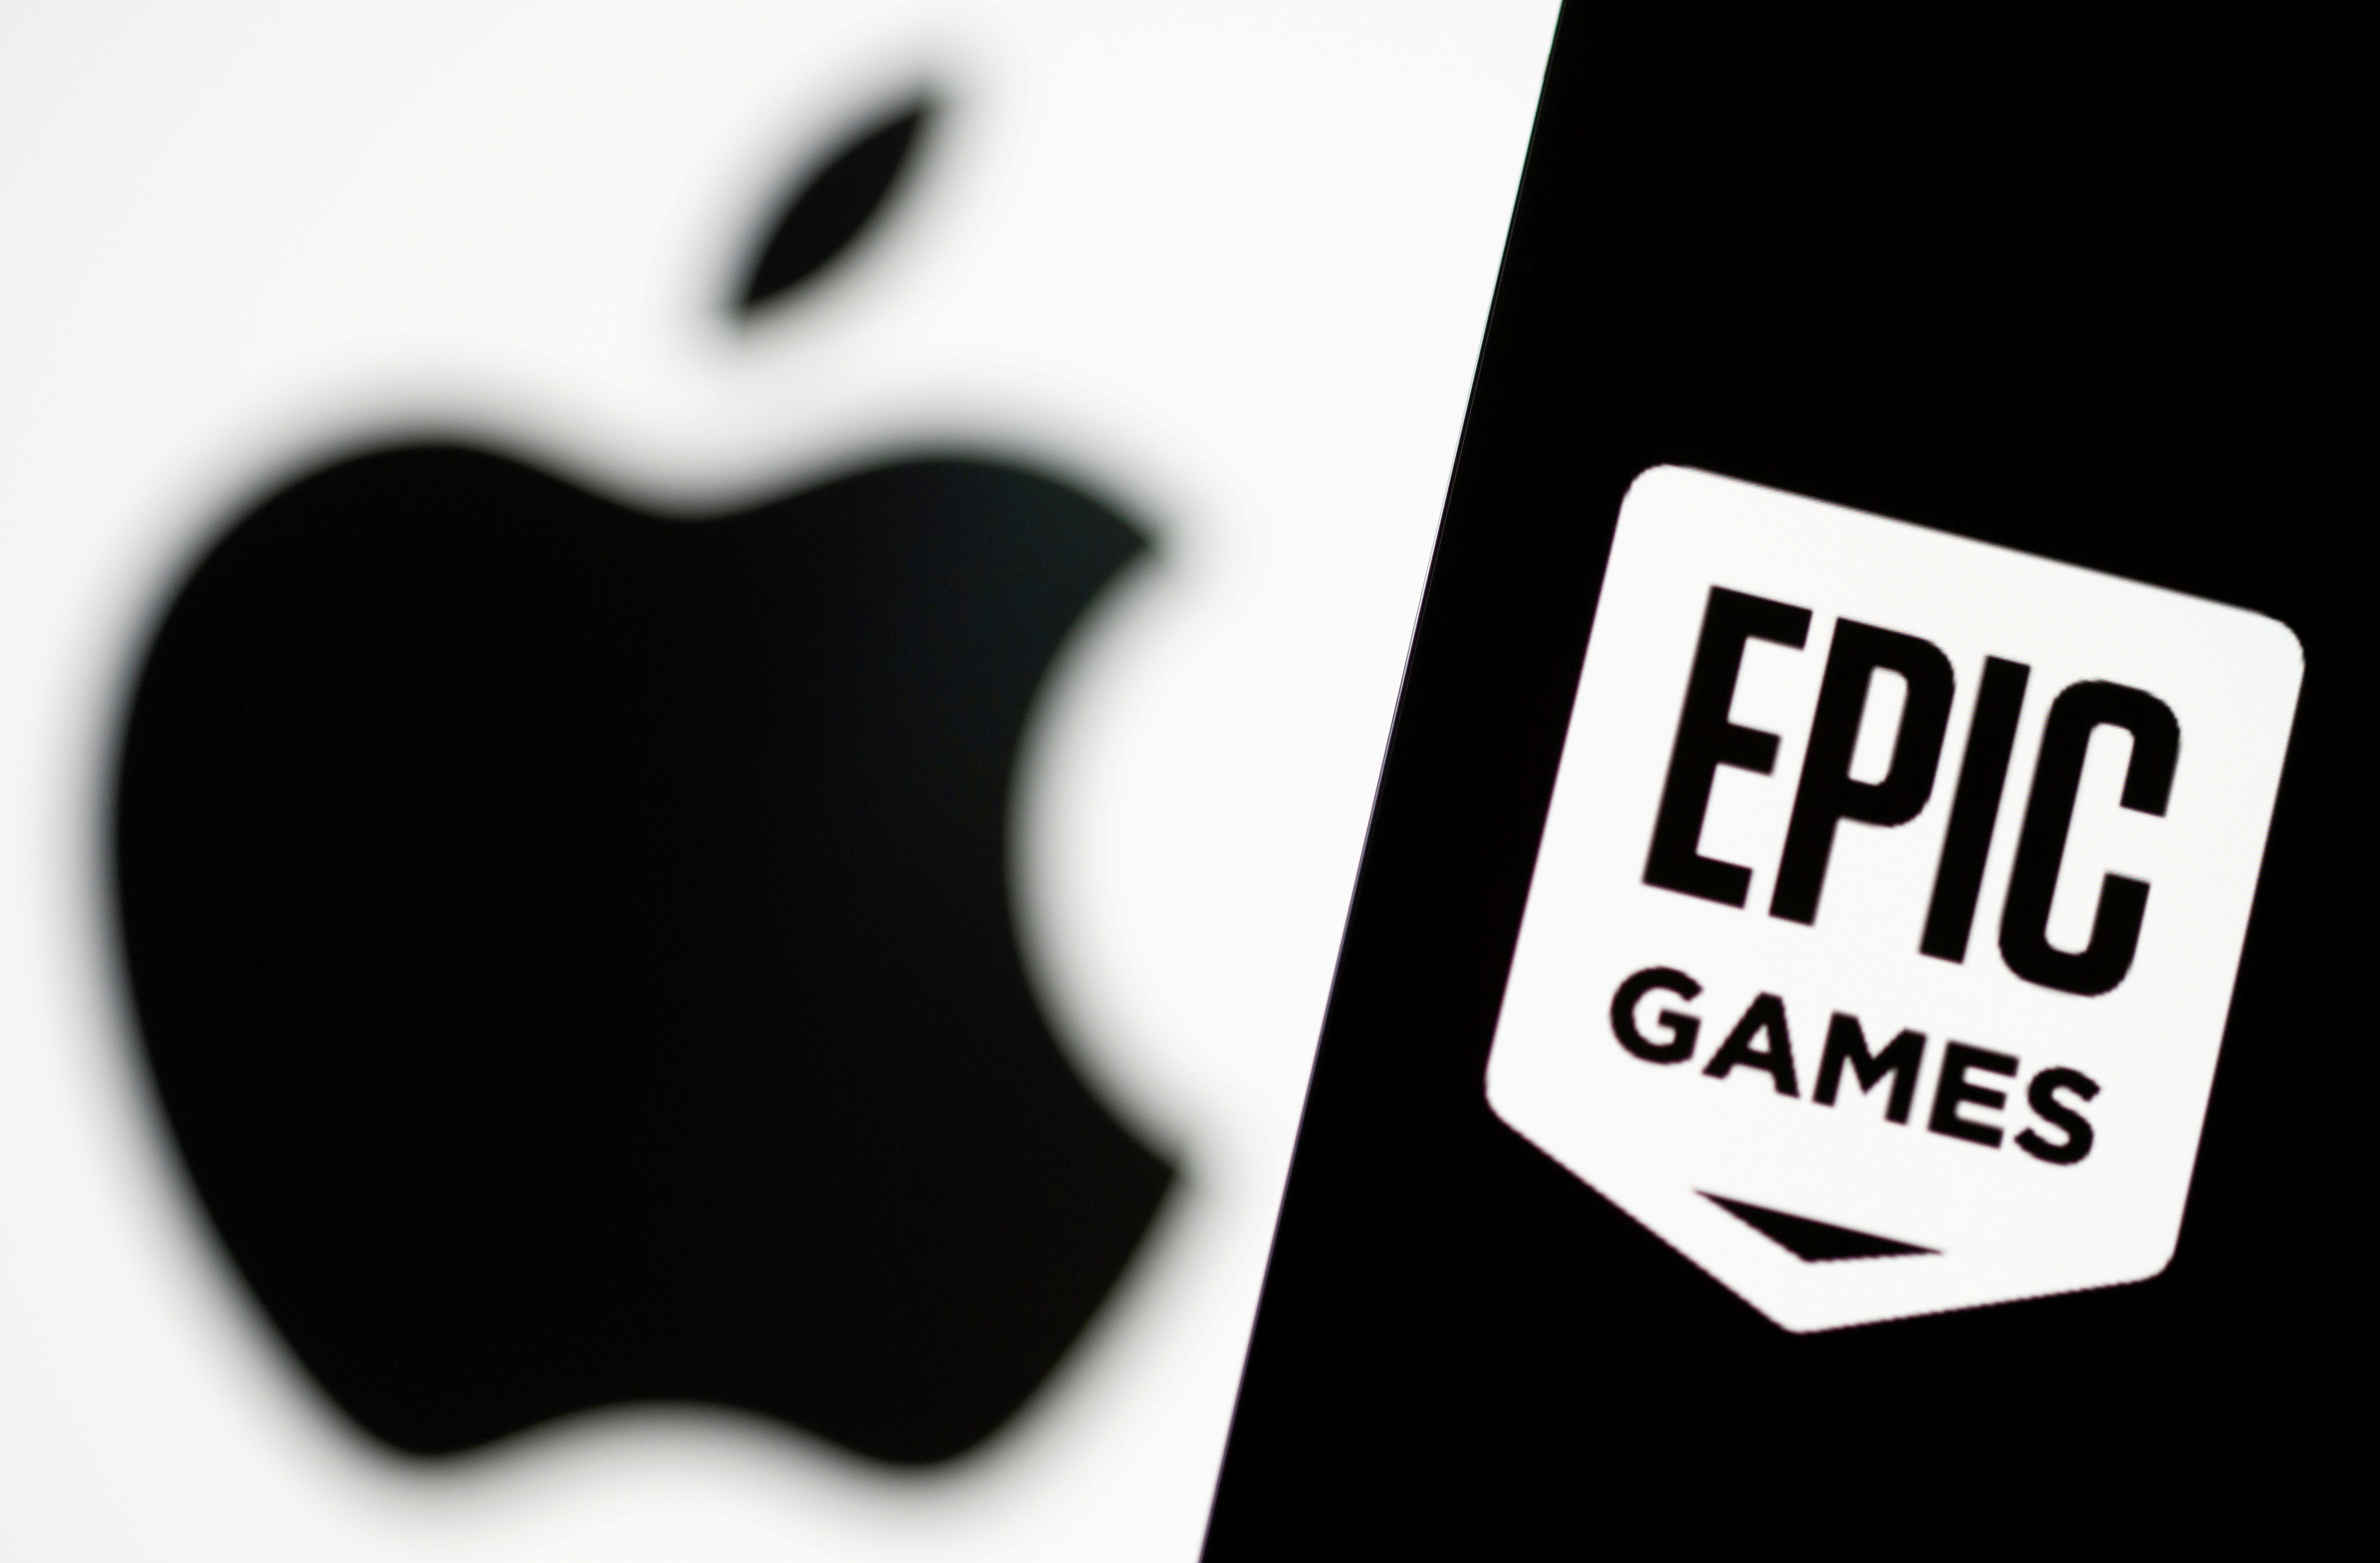 Smartphone with Epic Games logo is seen in front of Apple logo in this illustration